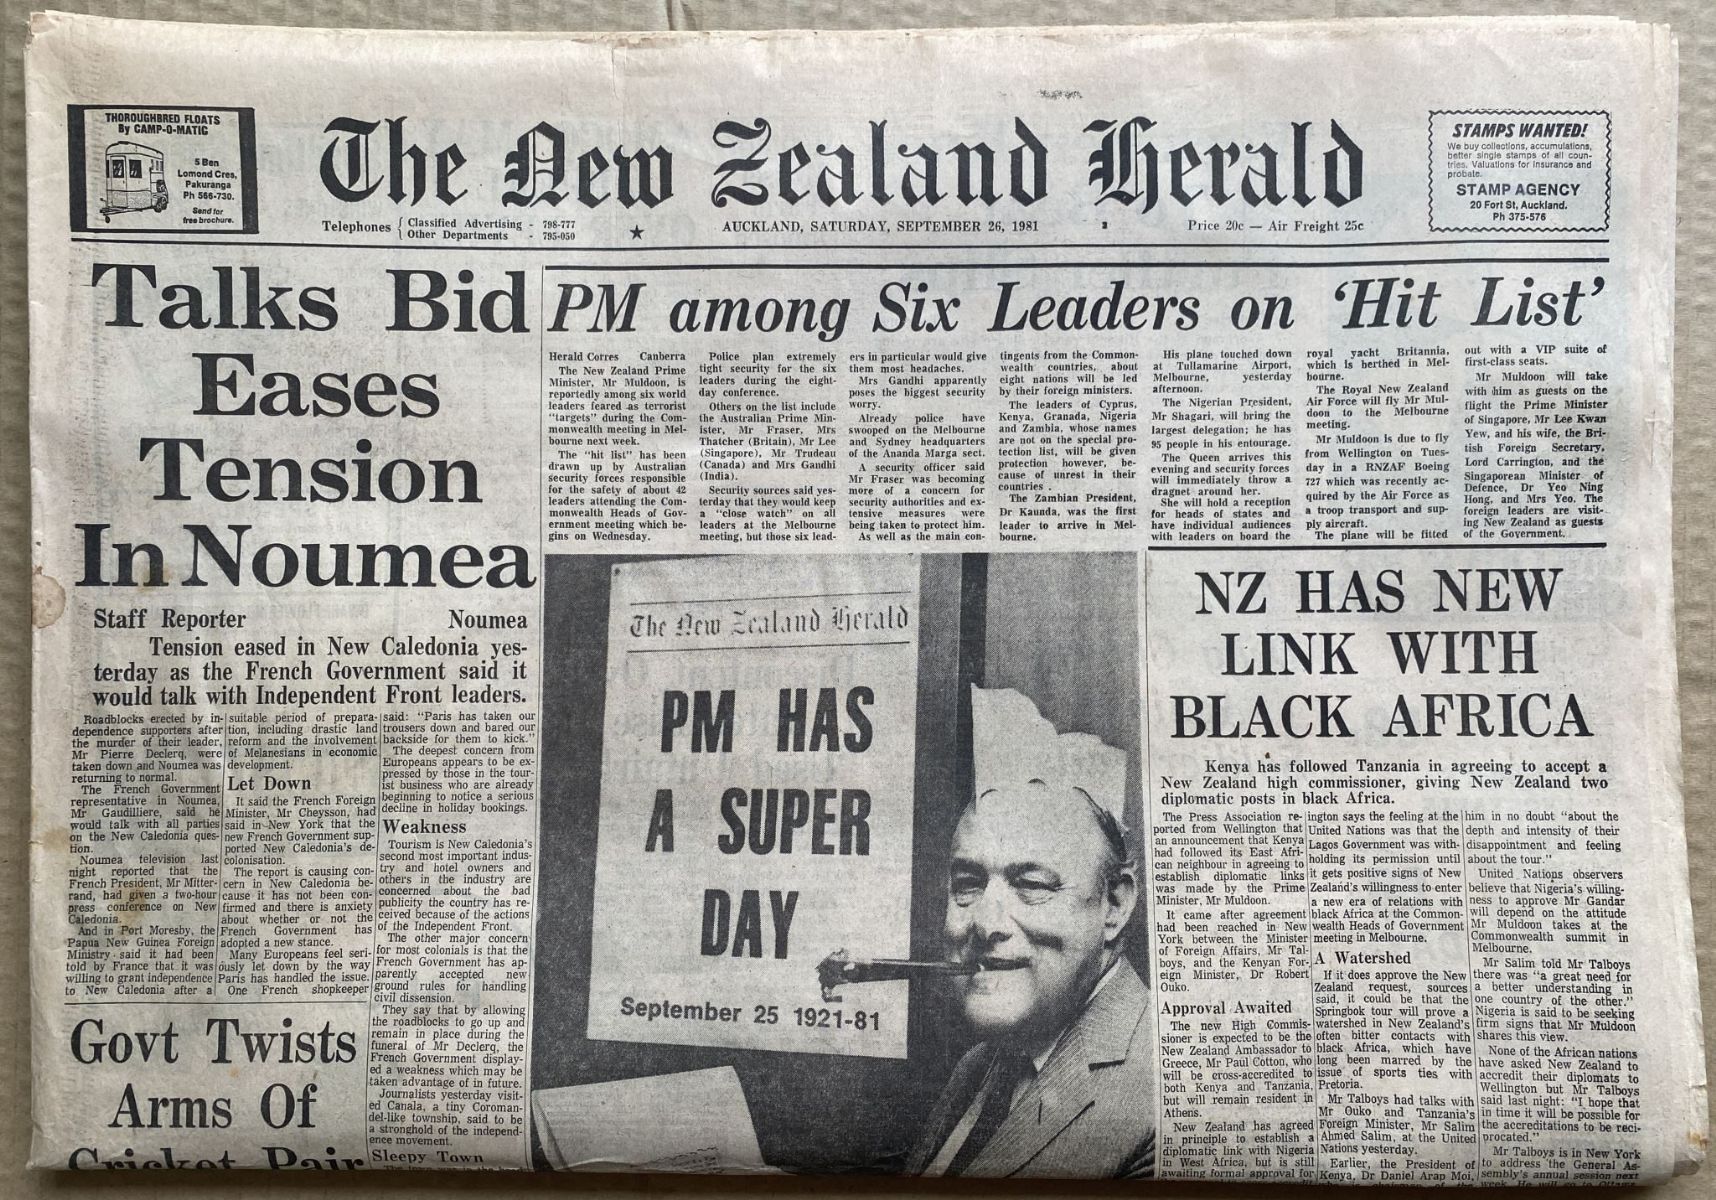 OLD NEWSPAPER: The New Zealand Herald, 26 September 1981 - Muldoon on hit list